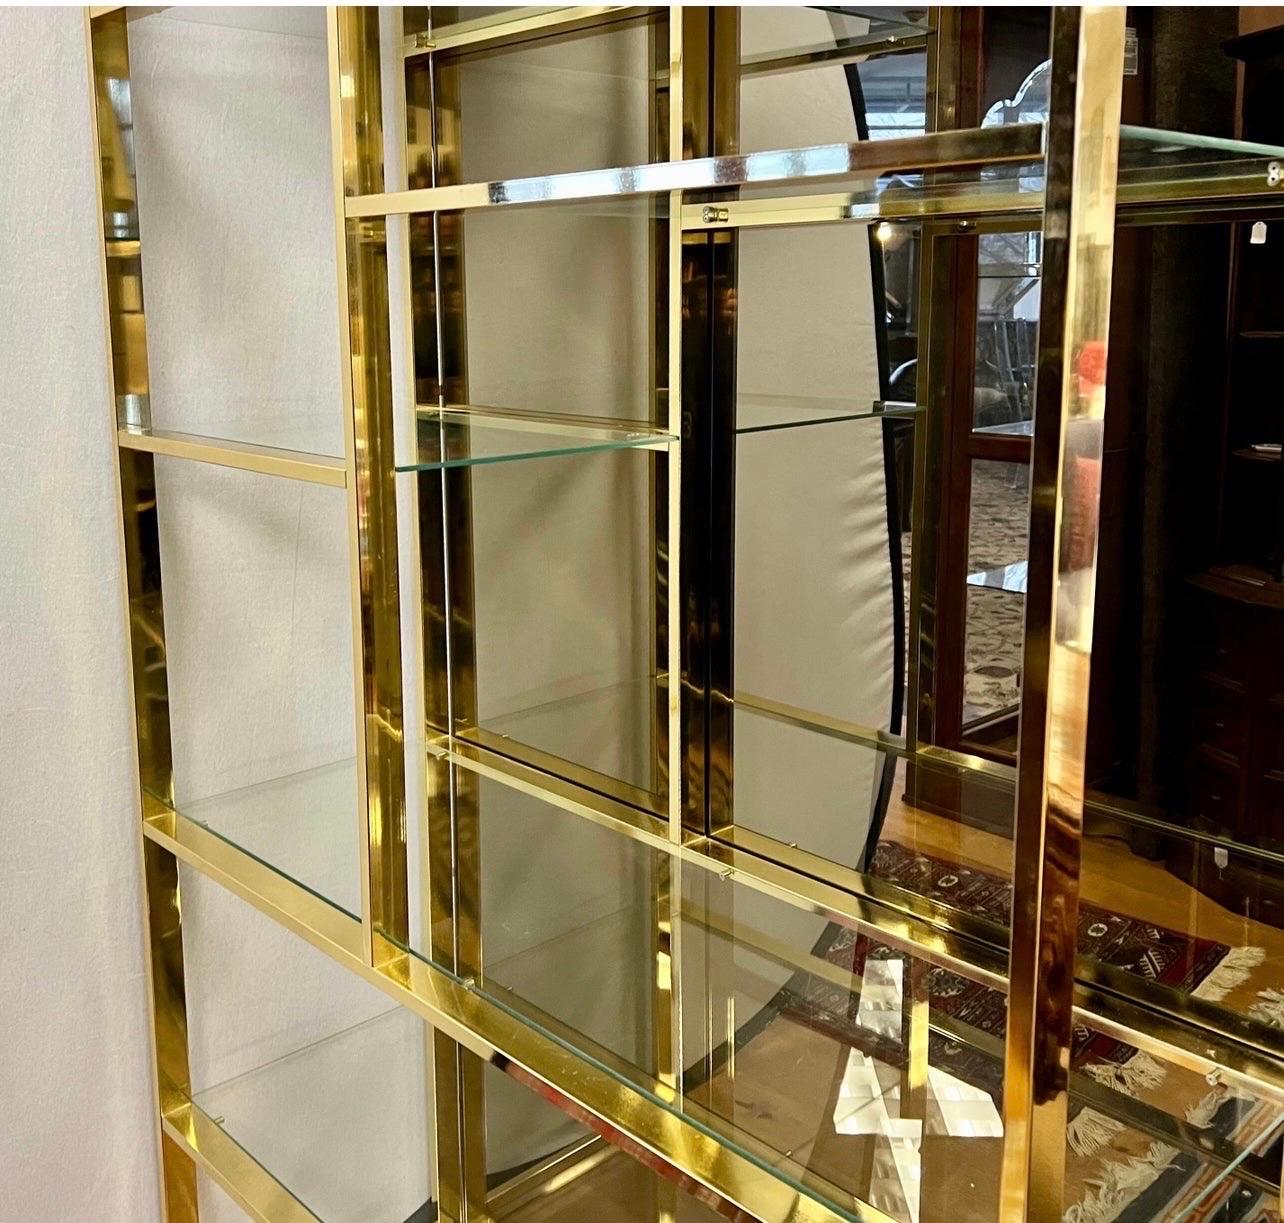 Magnificent mid-century brass and glass display etagere vitrine with mirrored back. Features two lights that illuminate from above. The geometric, staggered shelving allows optimal space to display books, picture frames, collectibles and much more.